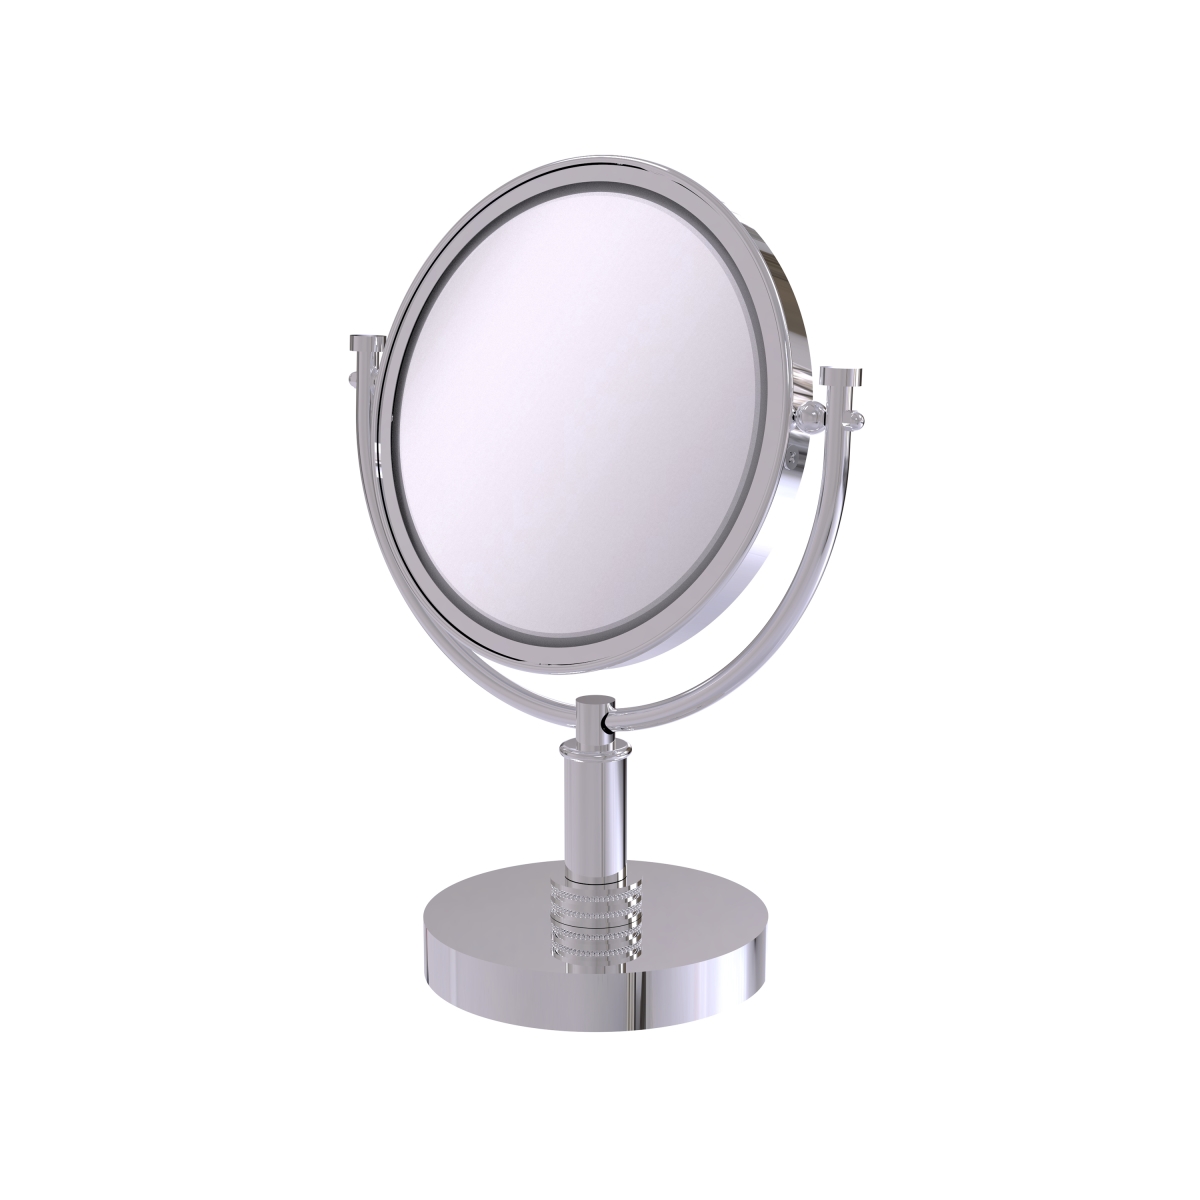 Picture of Allied Brass DM-4D-4X-PC 8 in. Vanity Top Make-Up Mirror 4X Magnification, Polished Chrome - 15 x 8 x 8 in.